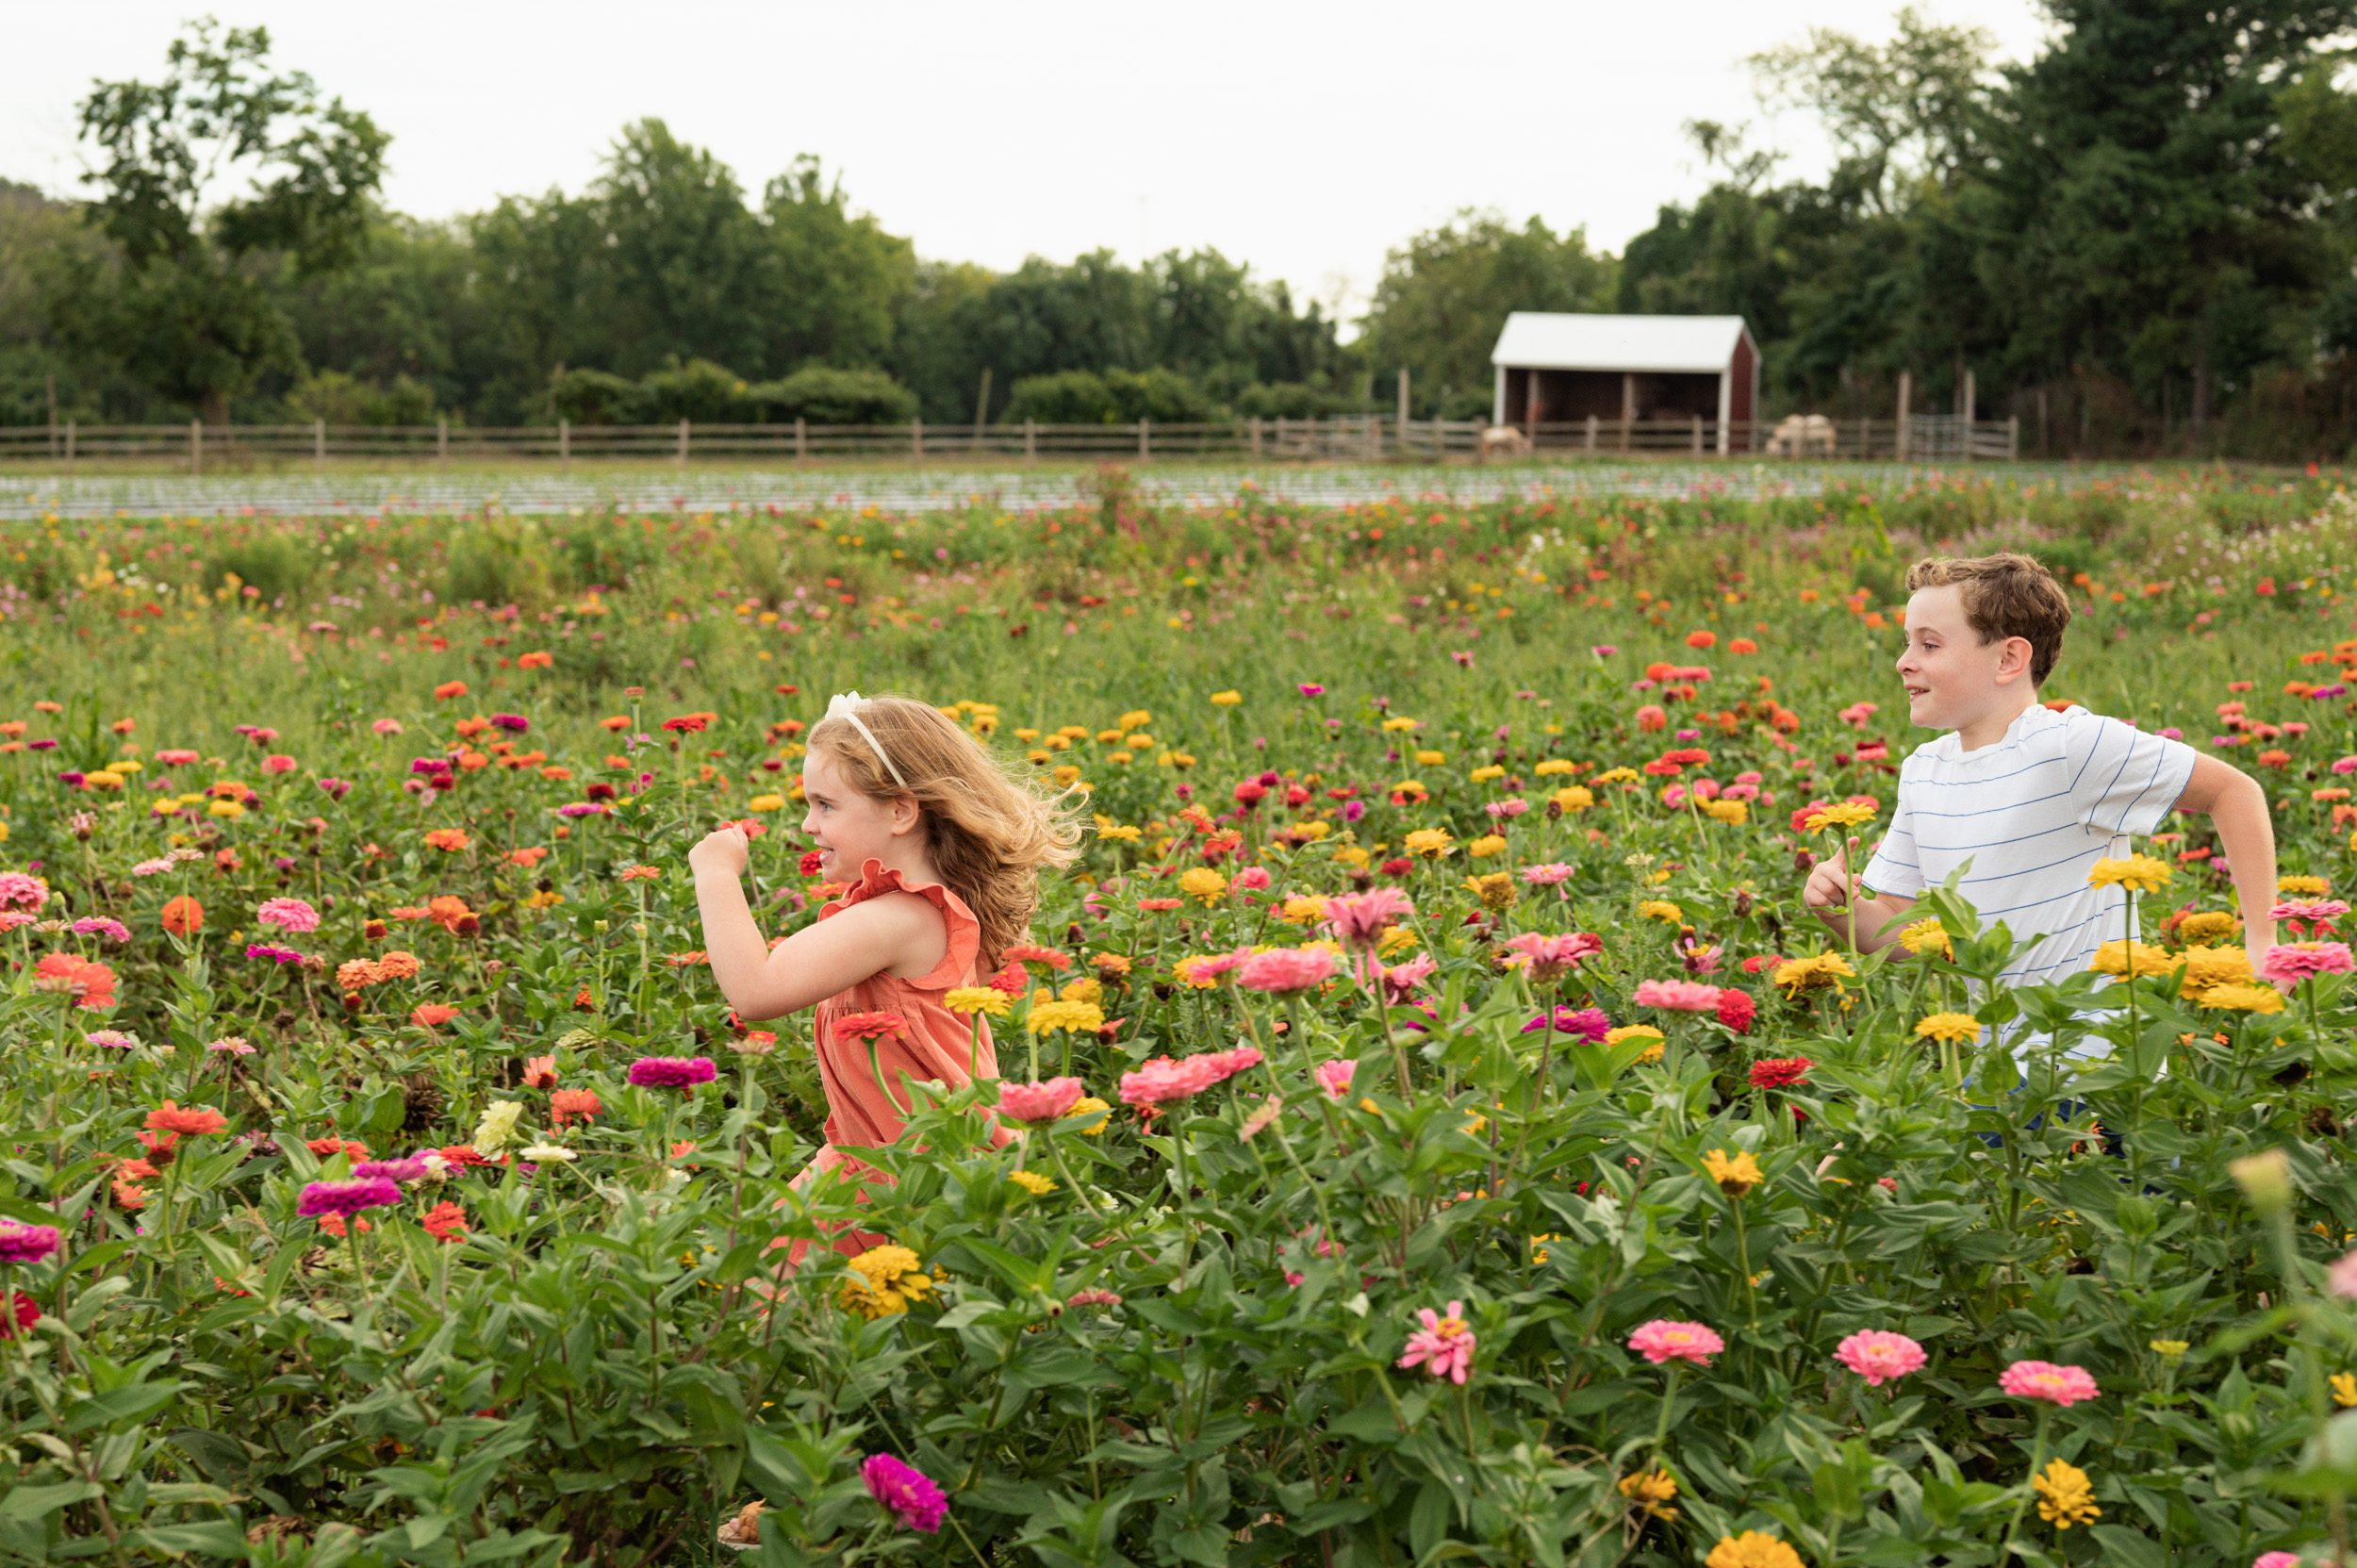 a young girl running through a field of colorful flowers as her brother chases after her during a philadelphia family photoshoot